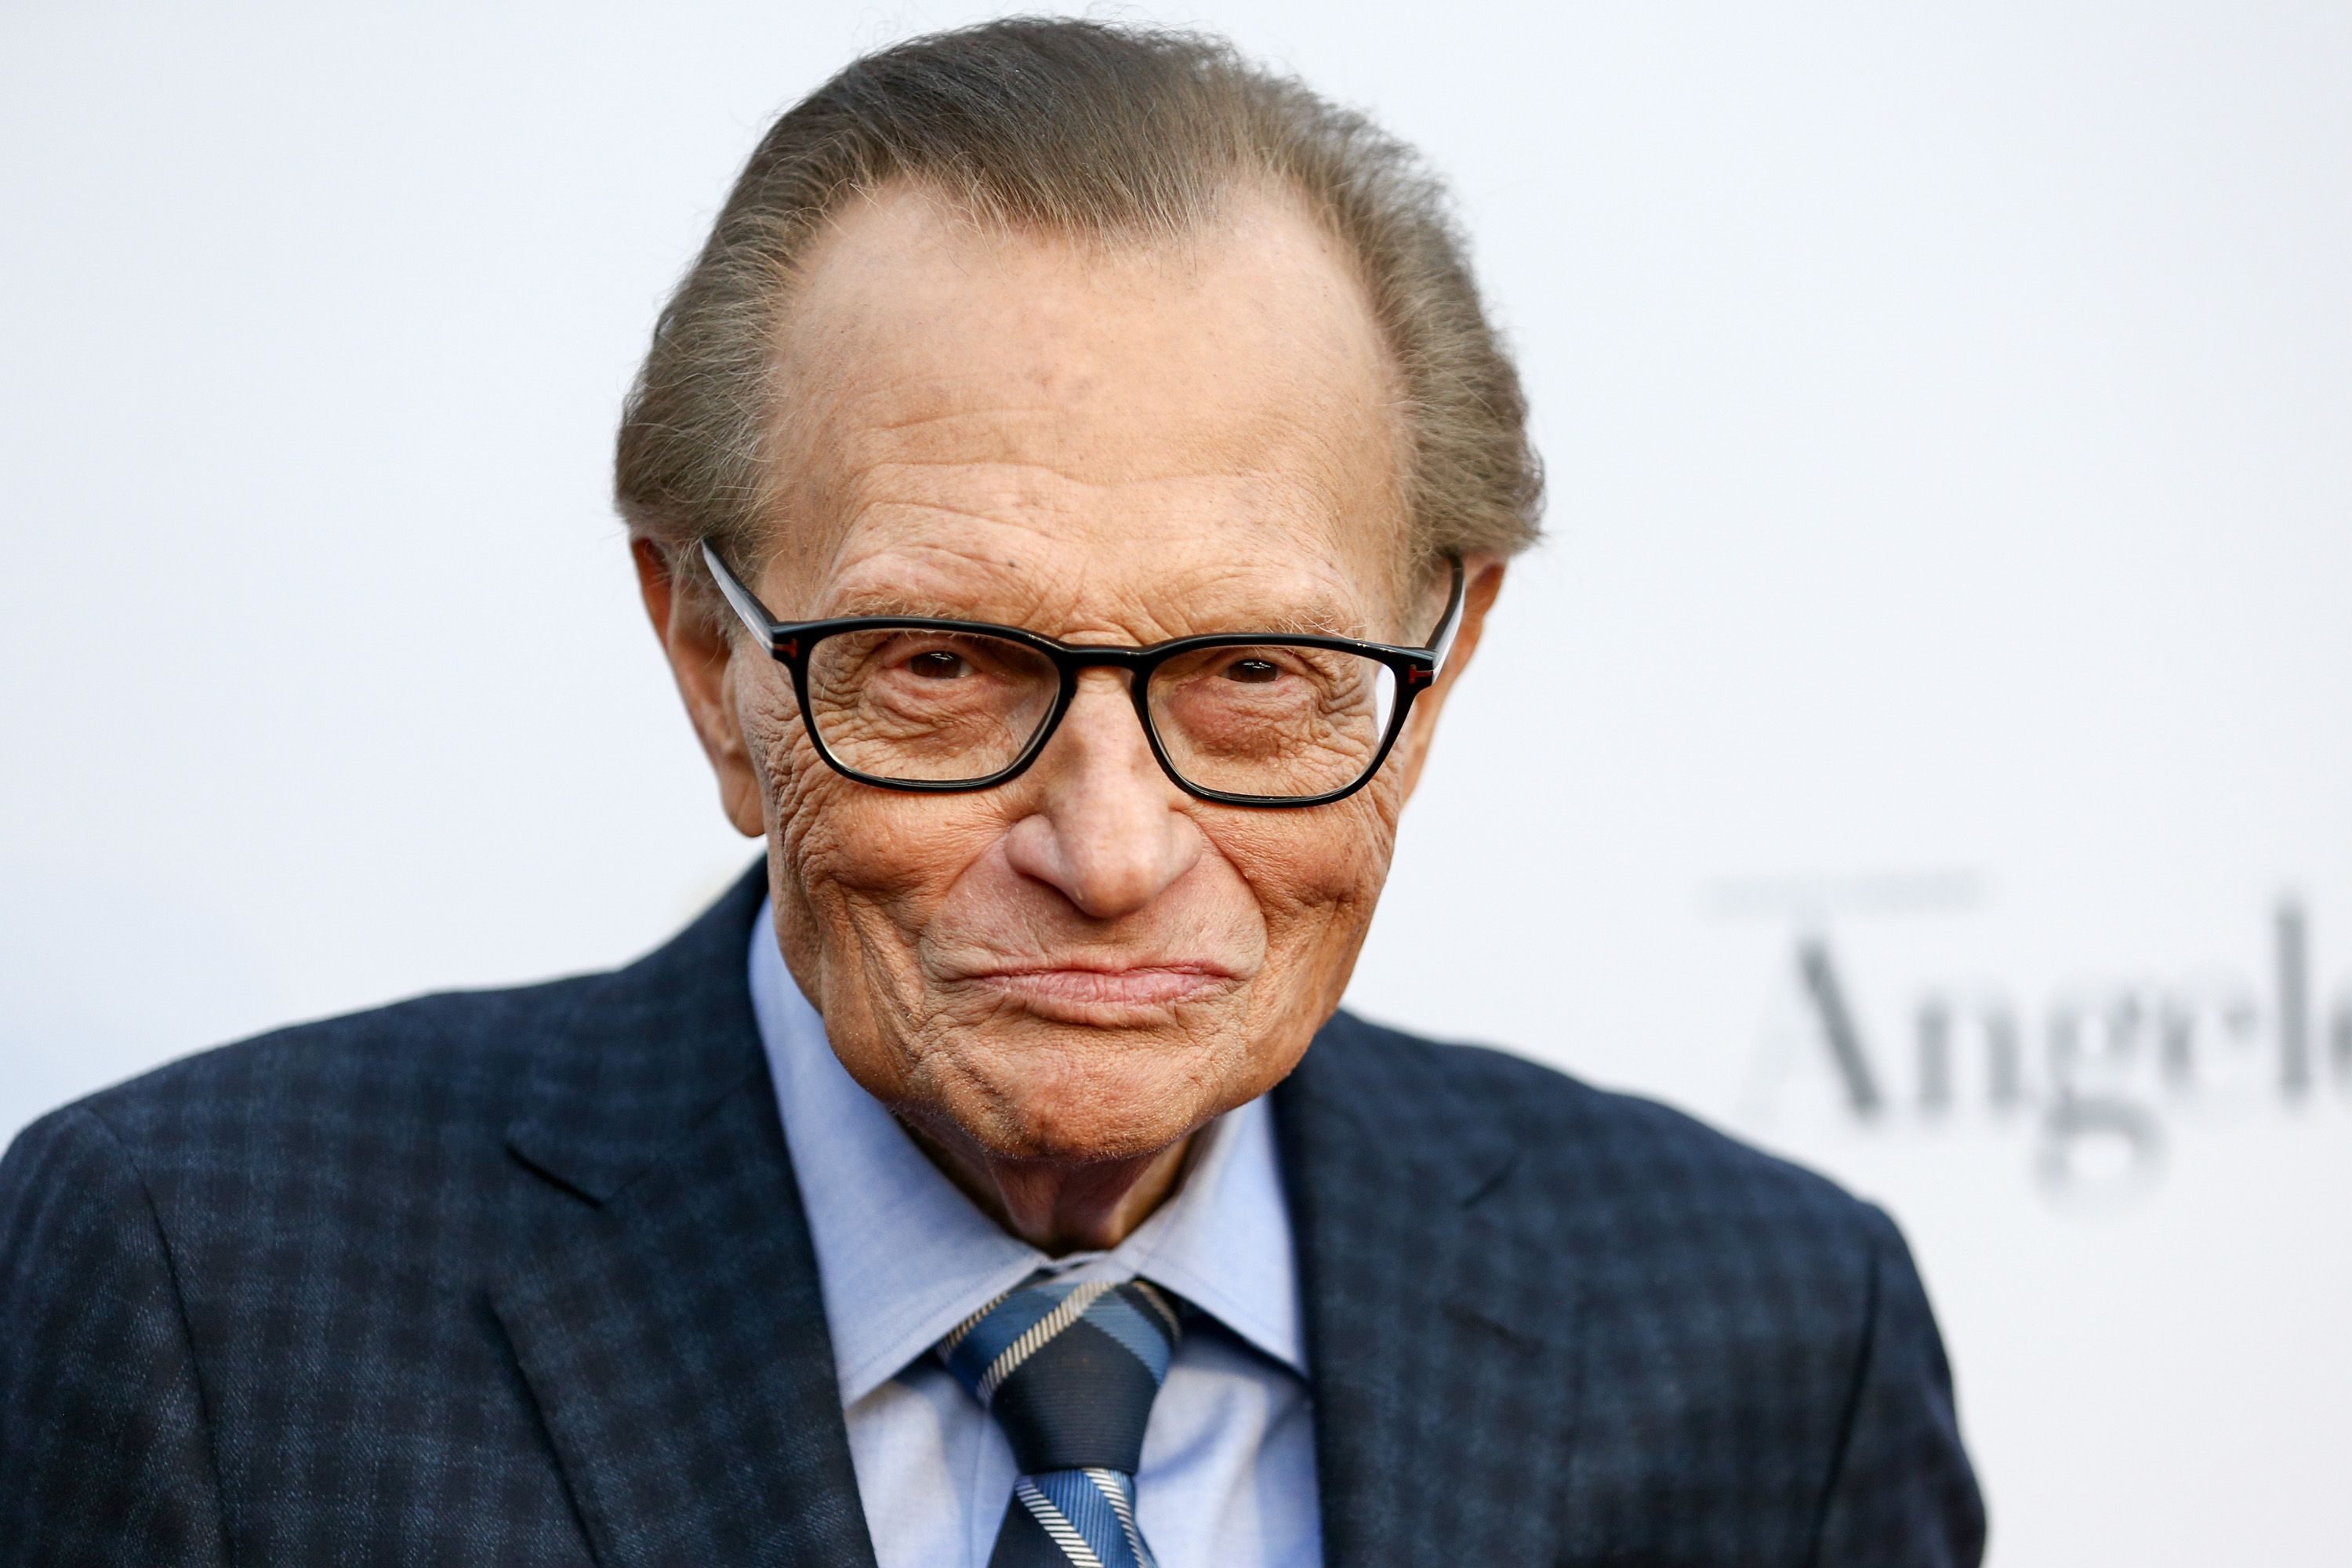 Television and radio host Larry King at the "Larry King" 60th Broadcasting Anniversary Event at HYDE Sunset: Kitchen + Cocktails in West Hollywood, California | Photo: Getty Images